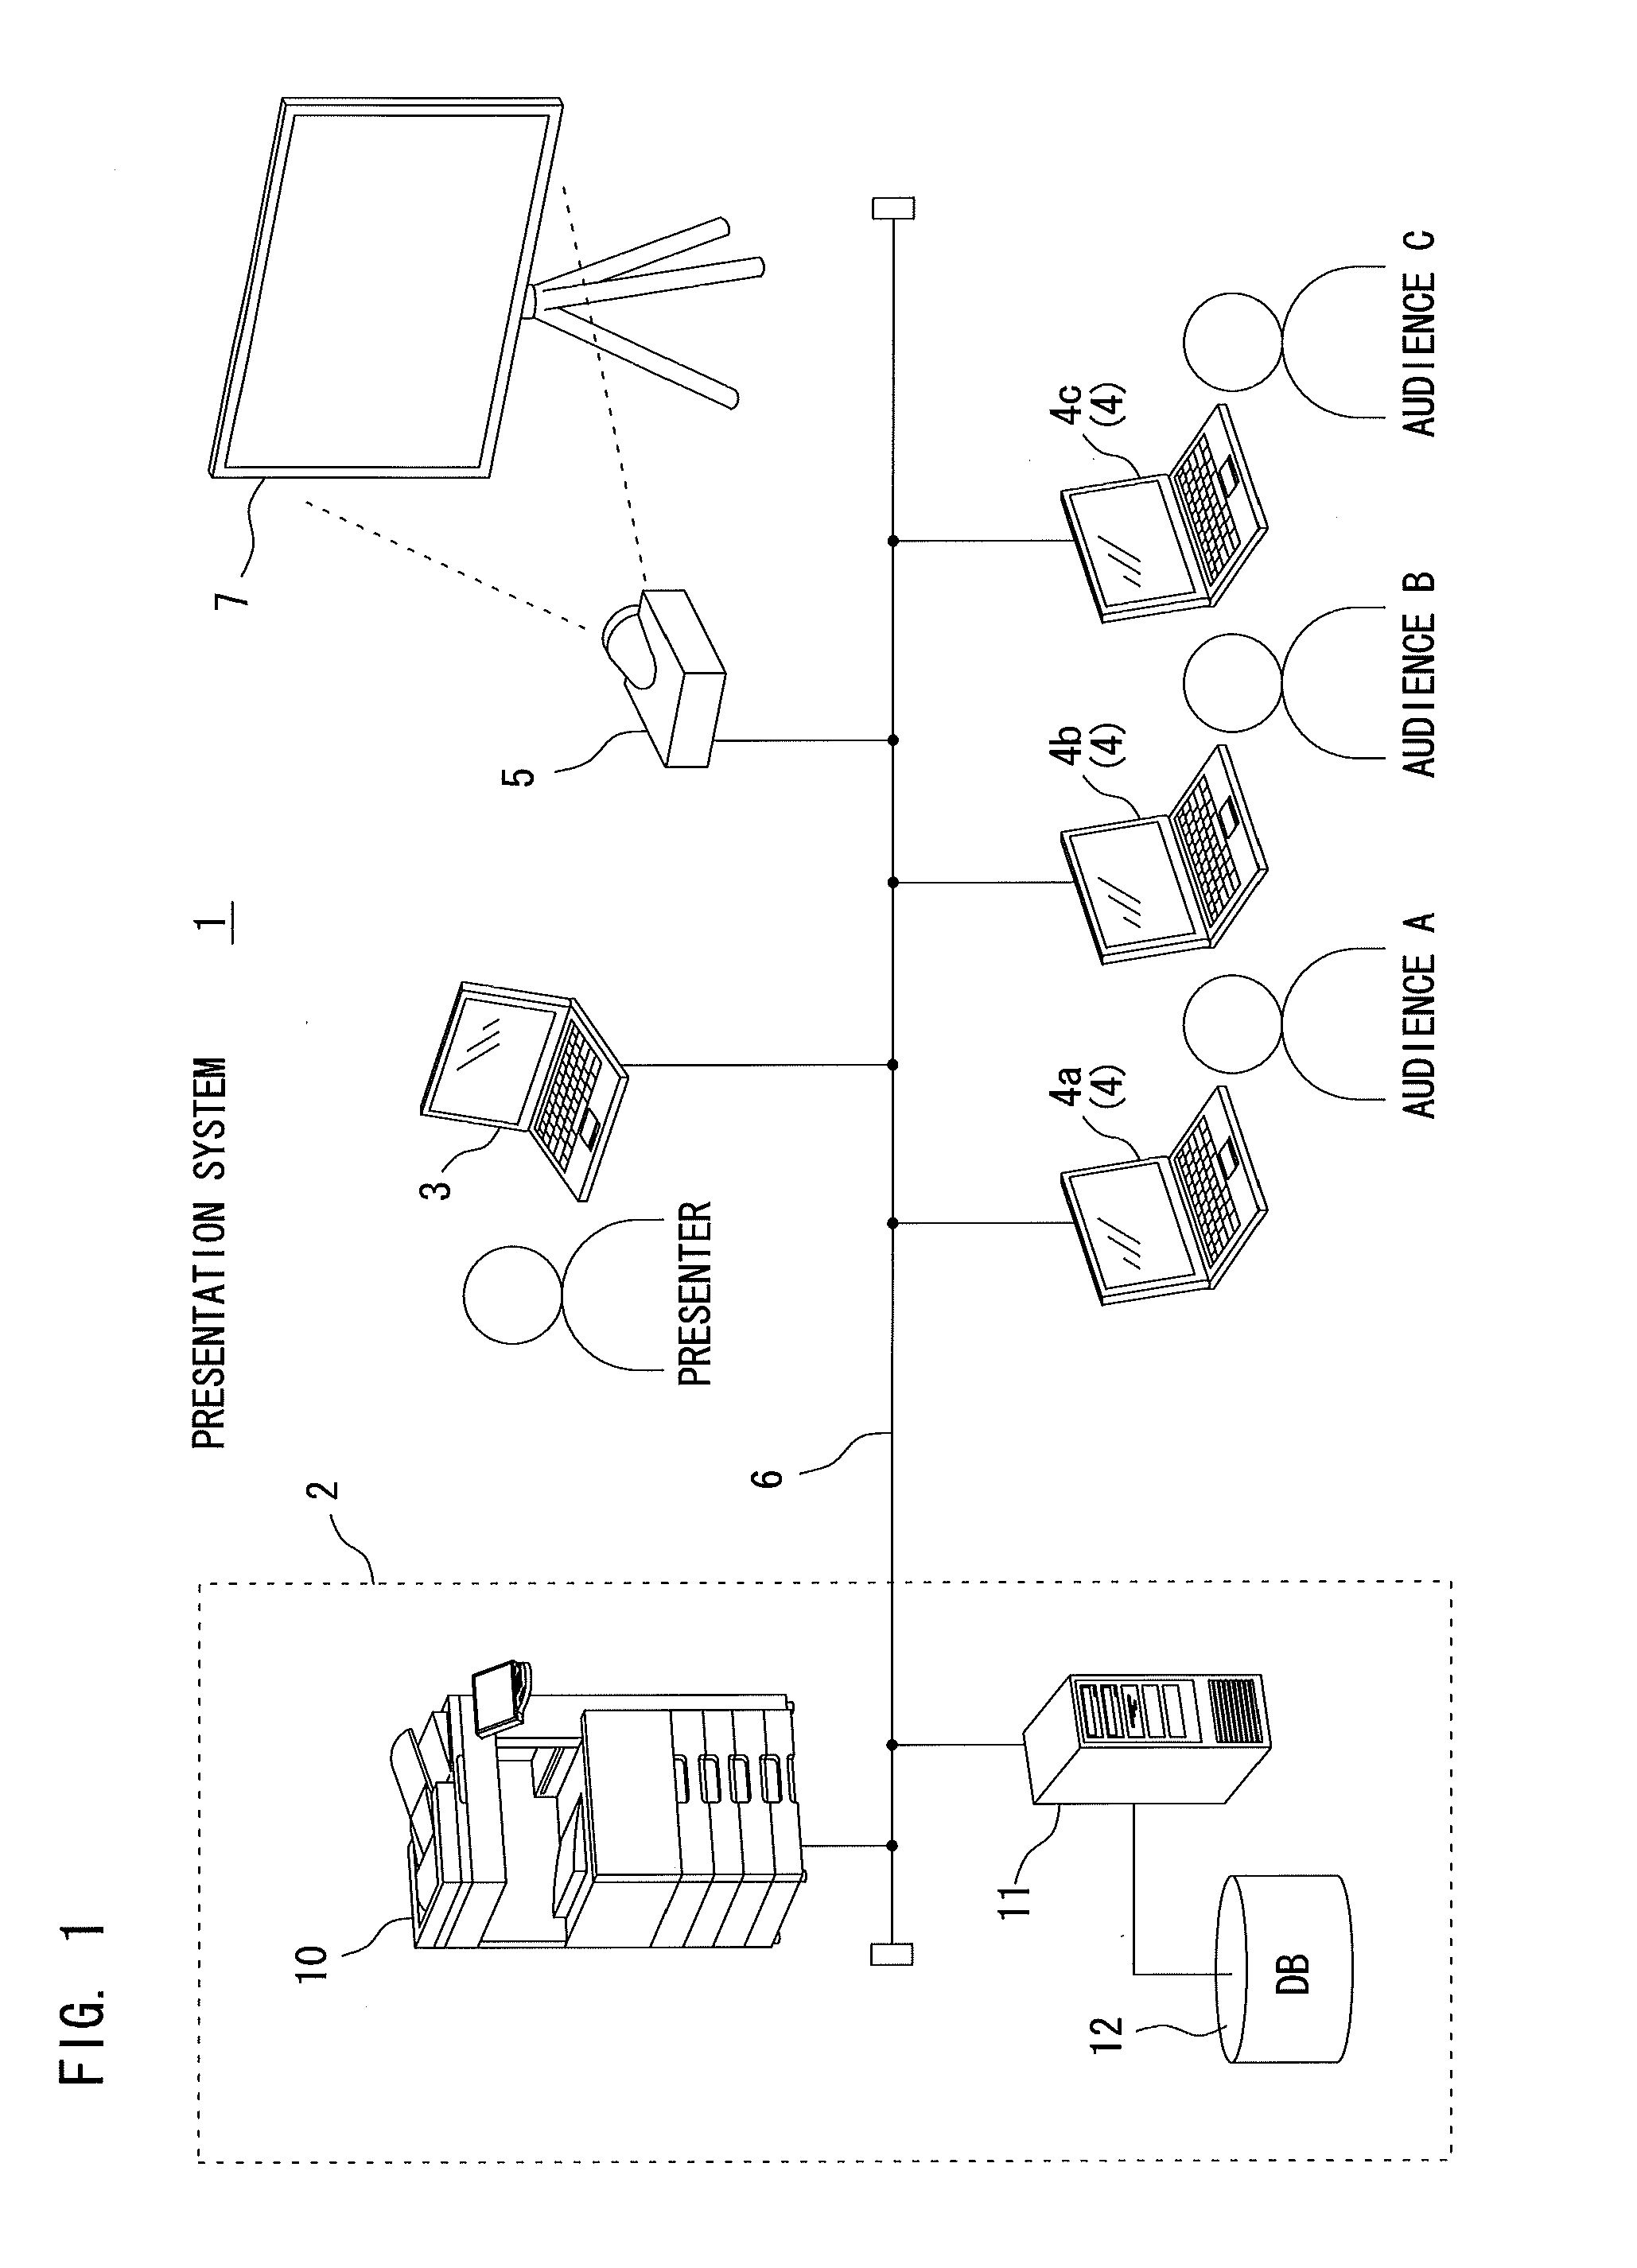 Presentation support device and computer readable medium